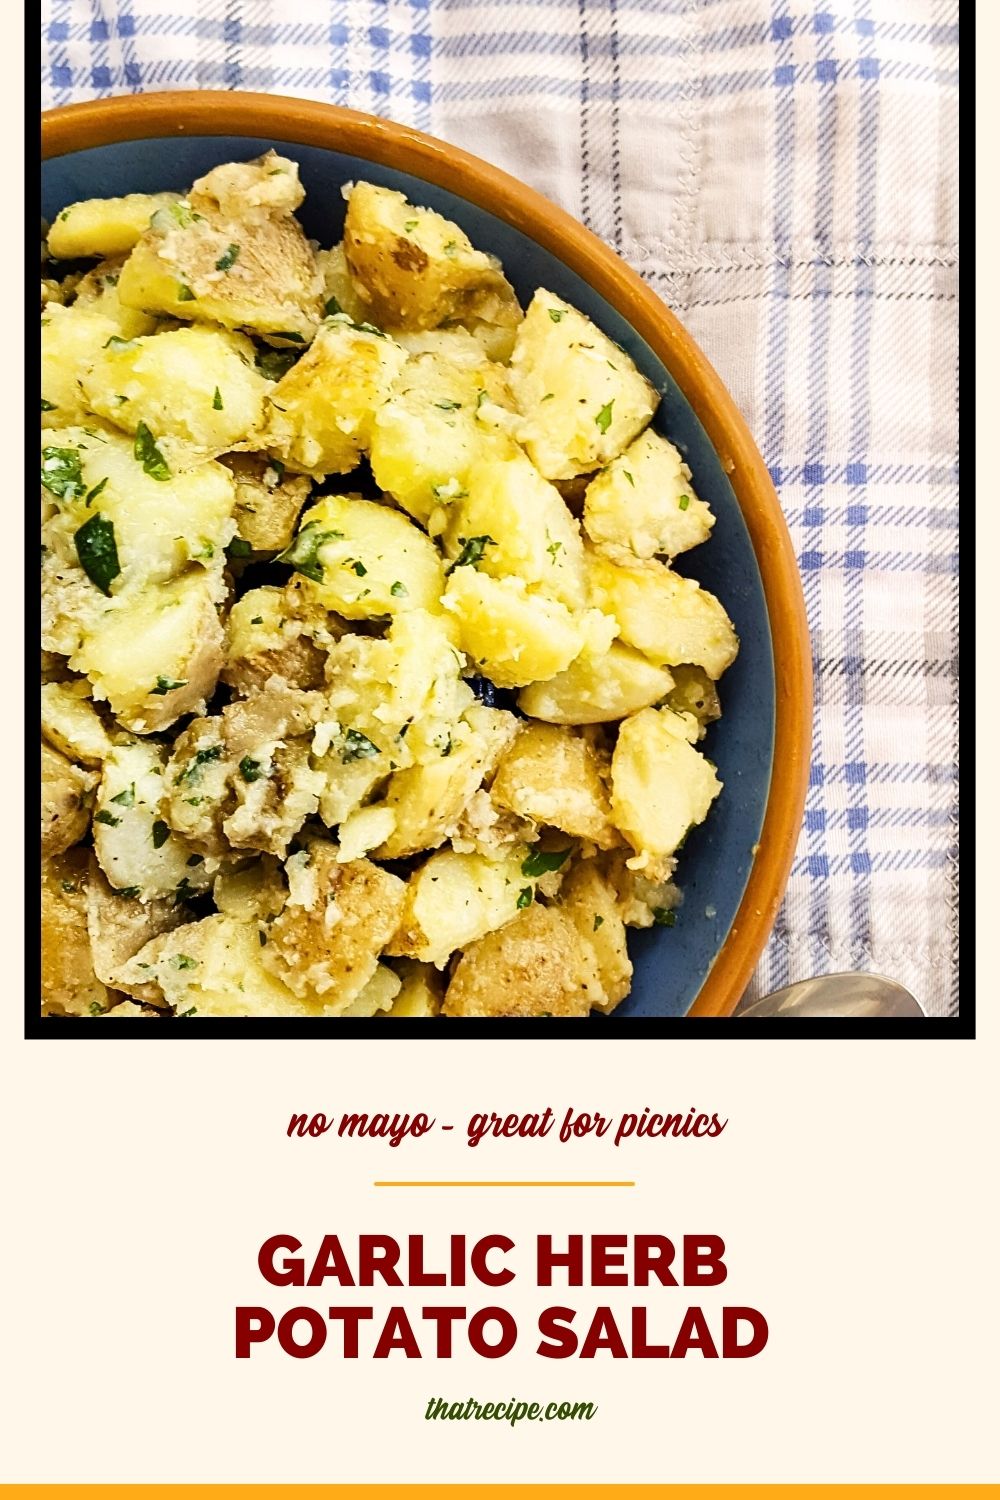 top down view of potato salad on a picnic blanket with text overlay "herb and garlic potato salad"